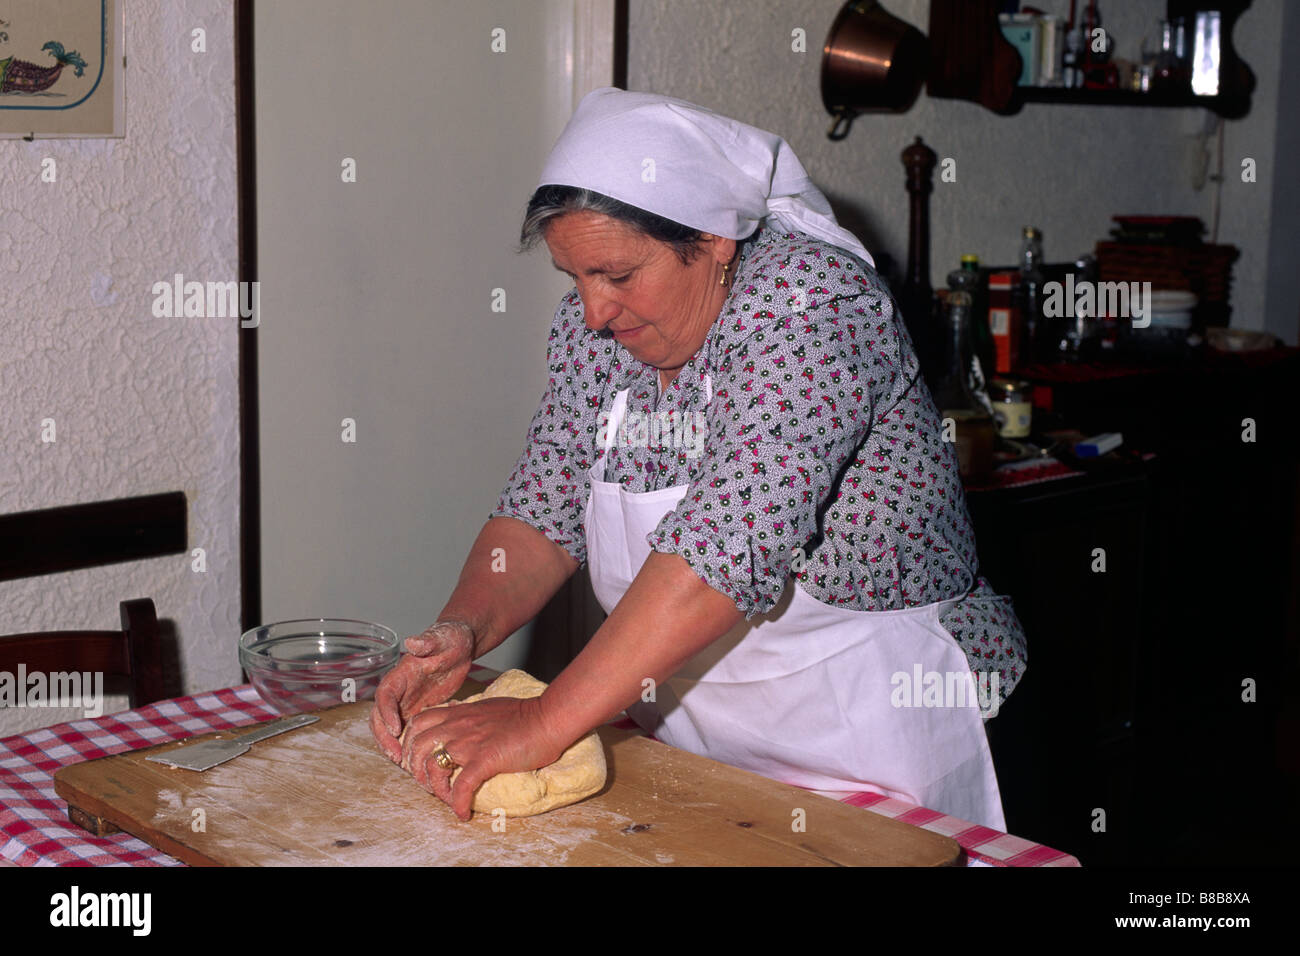 Italy, Calabria, woman preparing traditional pasta with flour and eggs Stock Photo